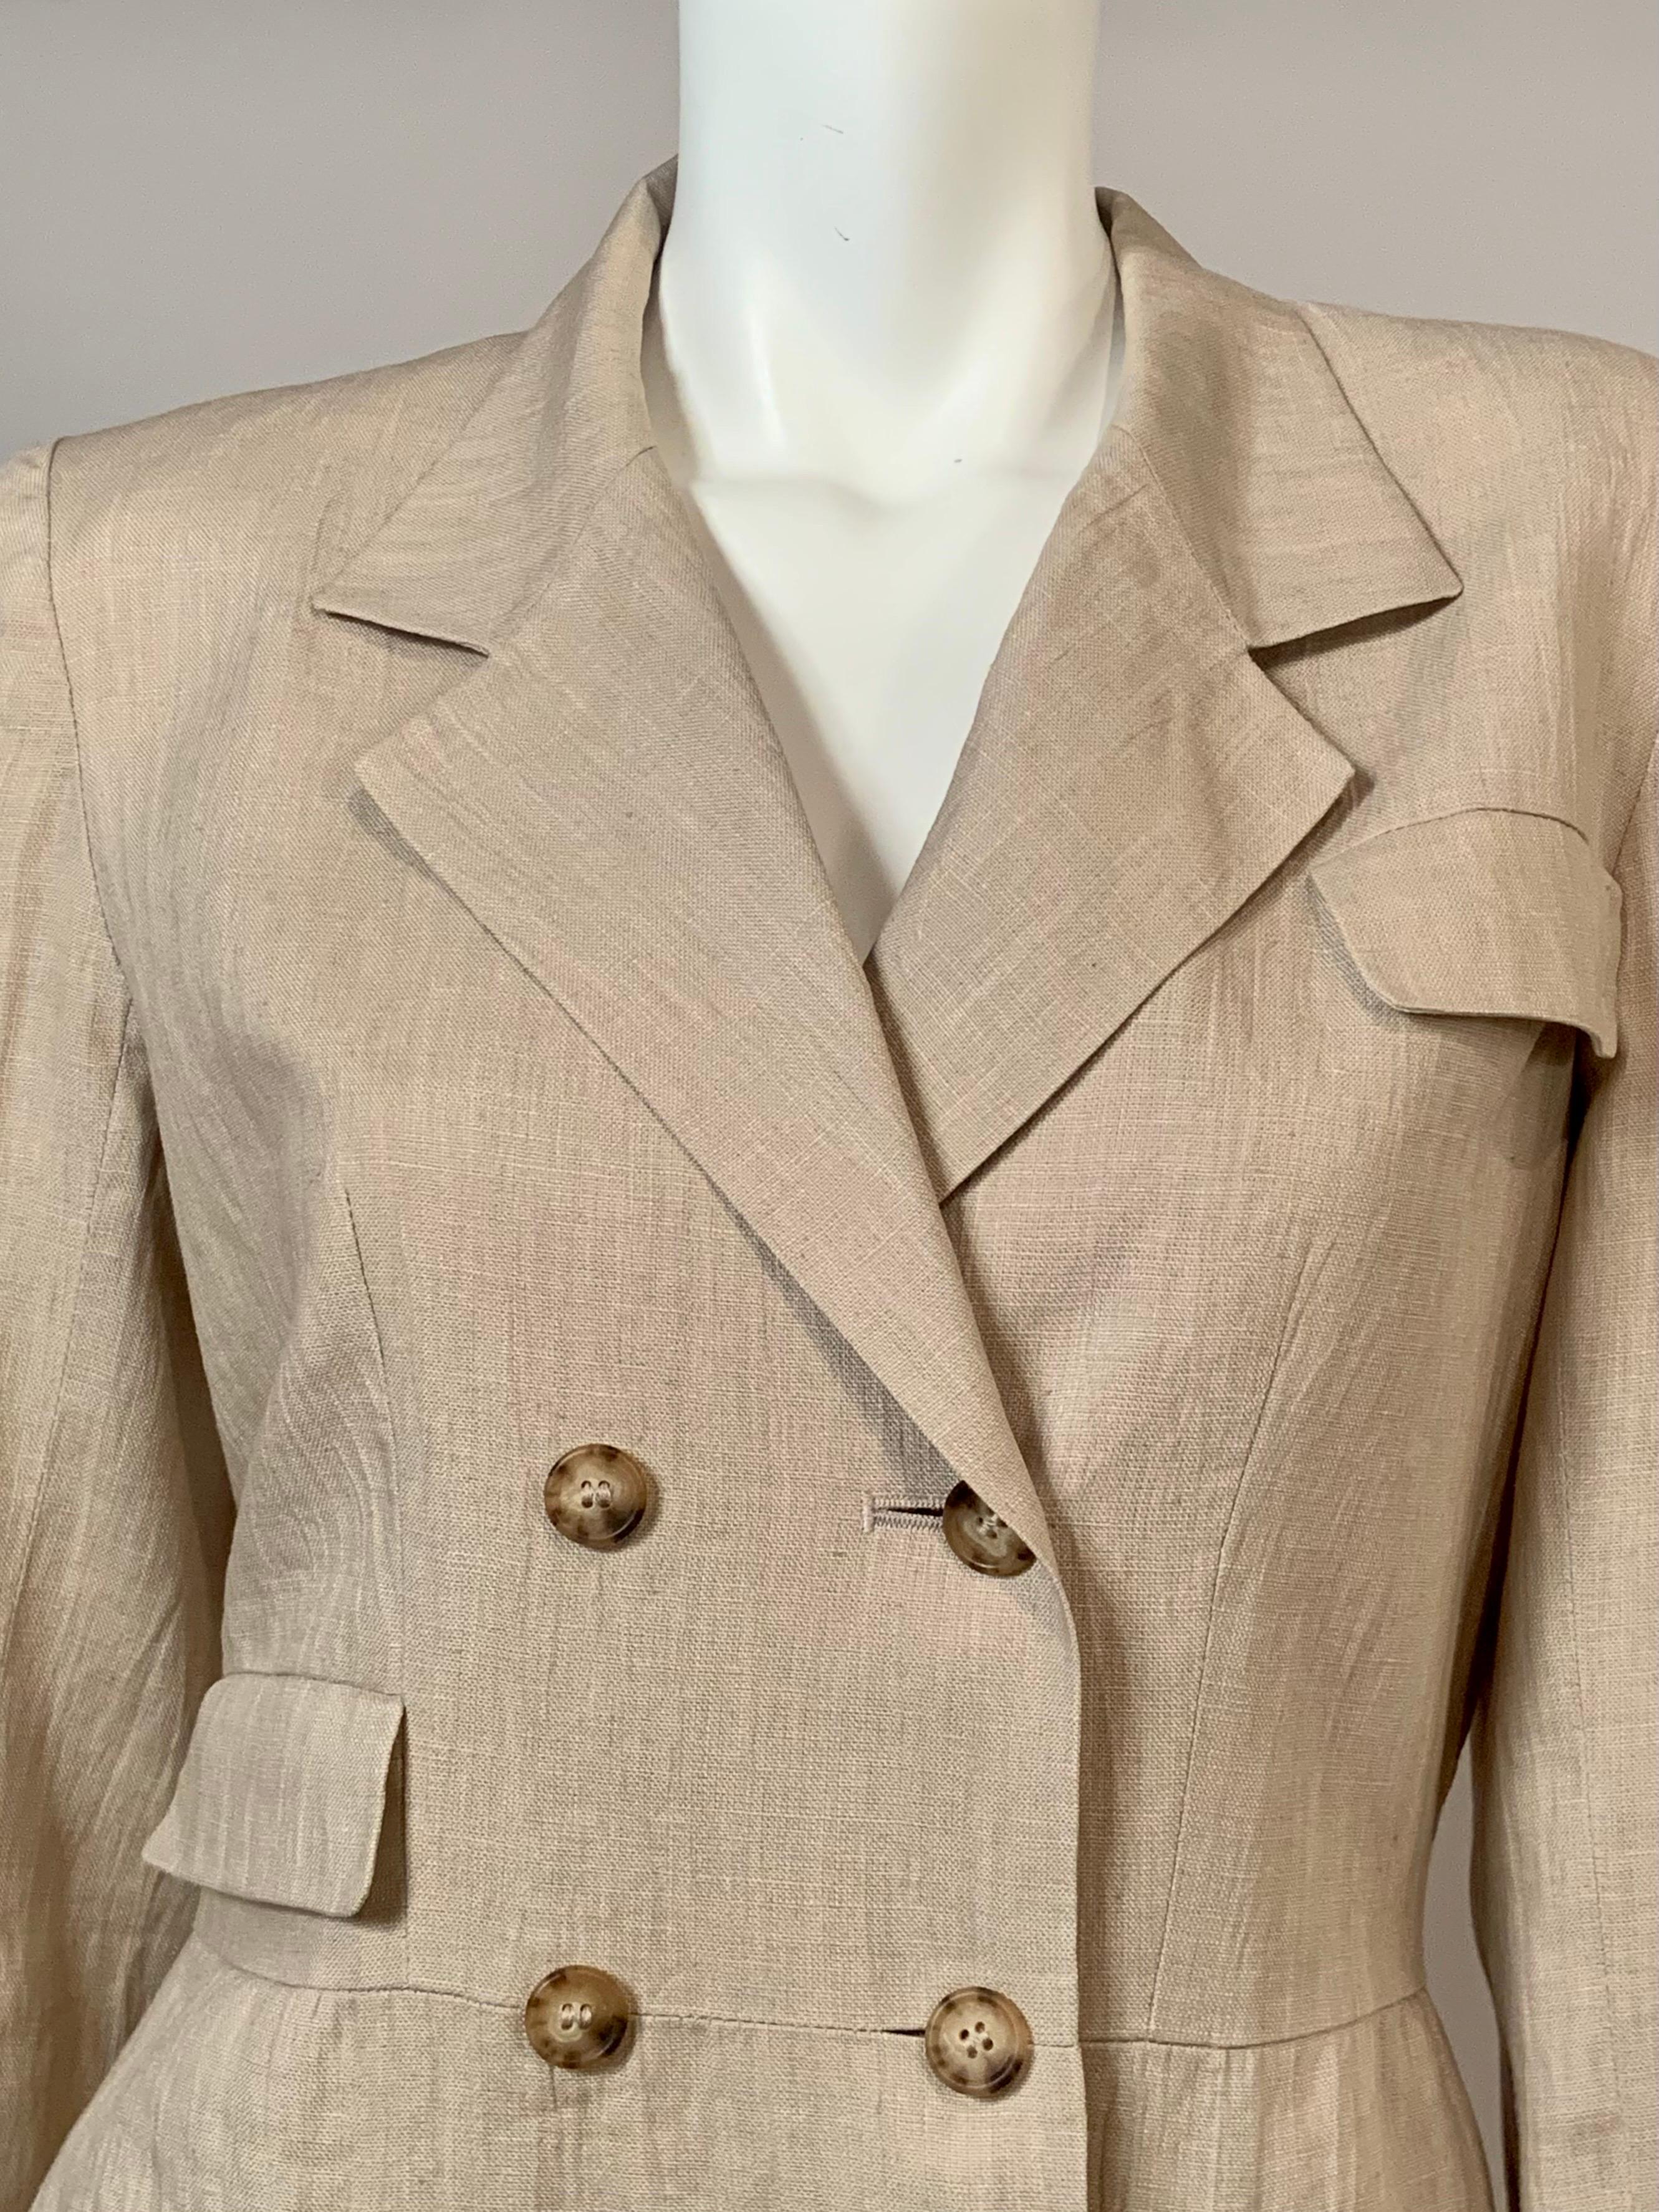 Irish Linen Duster Coat Made in Ireland by Willis & Geiger Outfitters In Good Condition For Sale In New Hope, PA